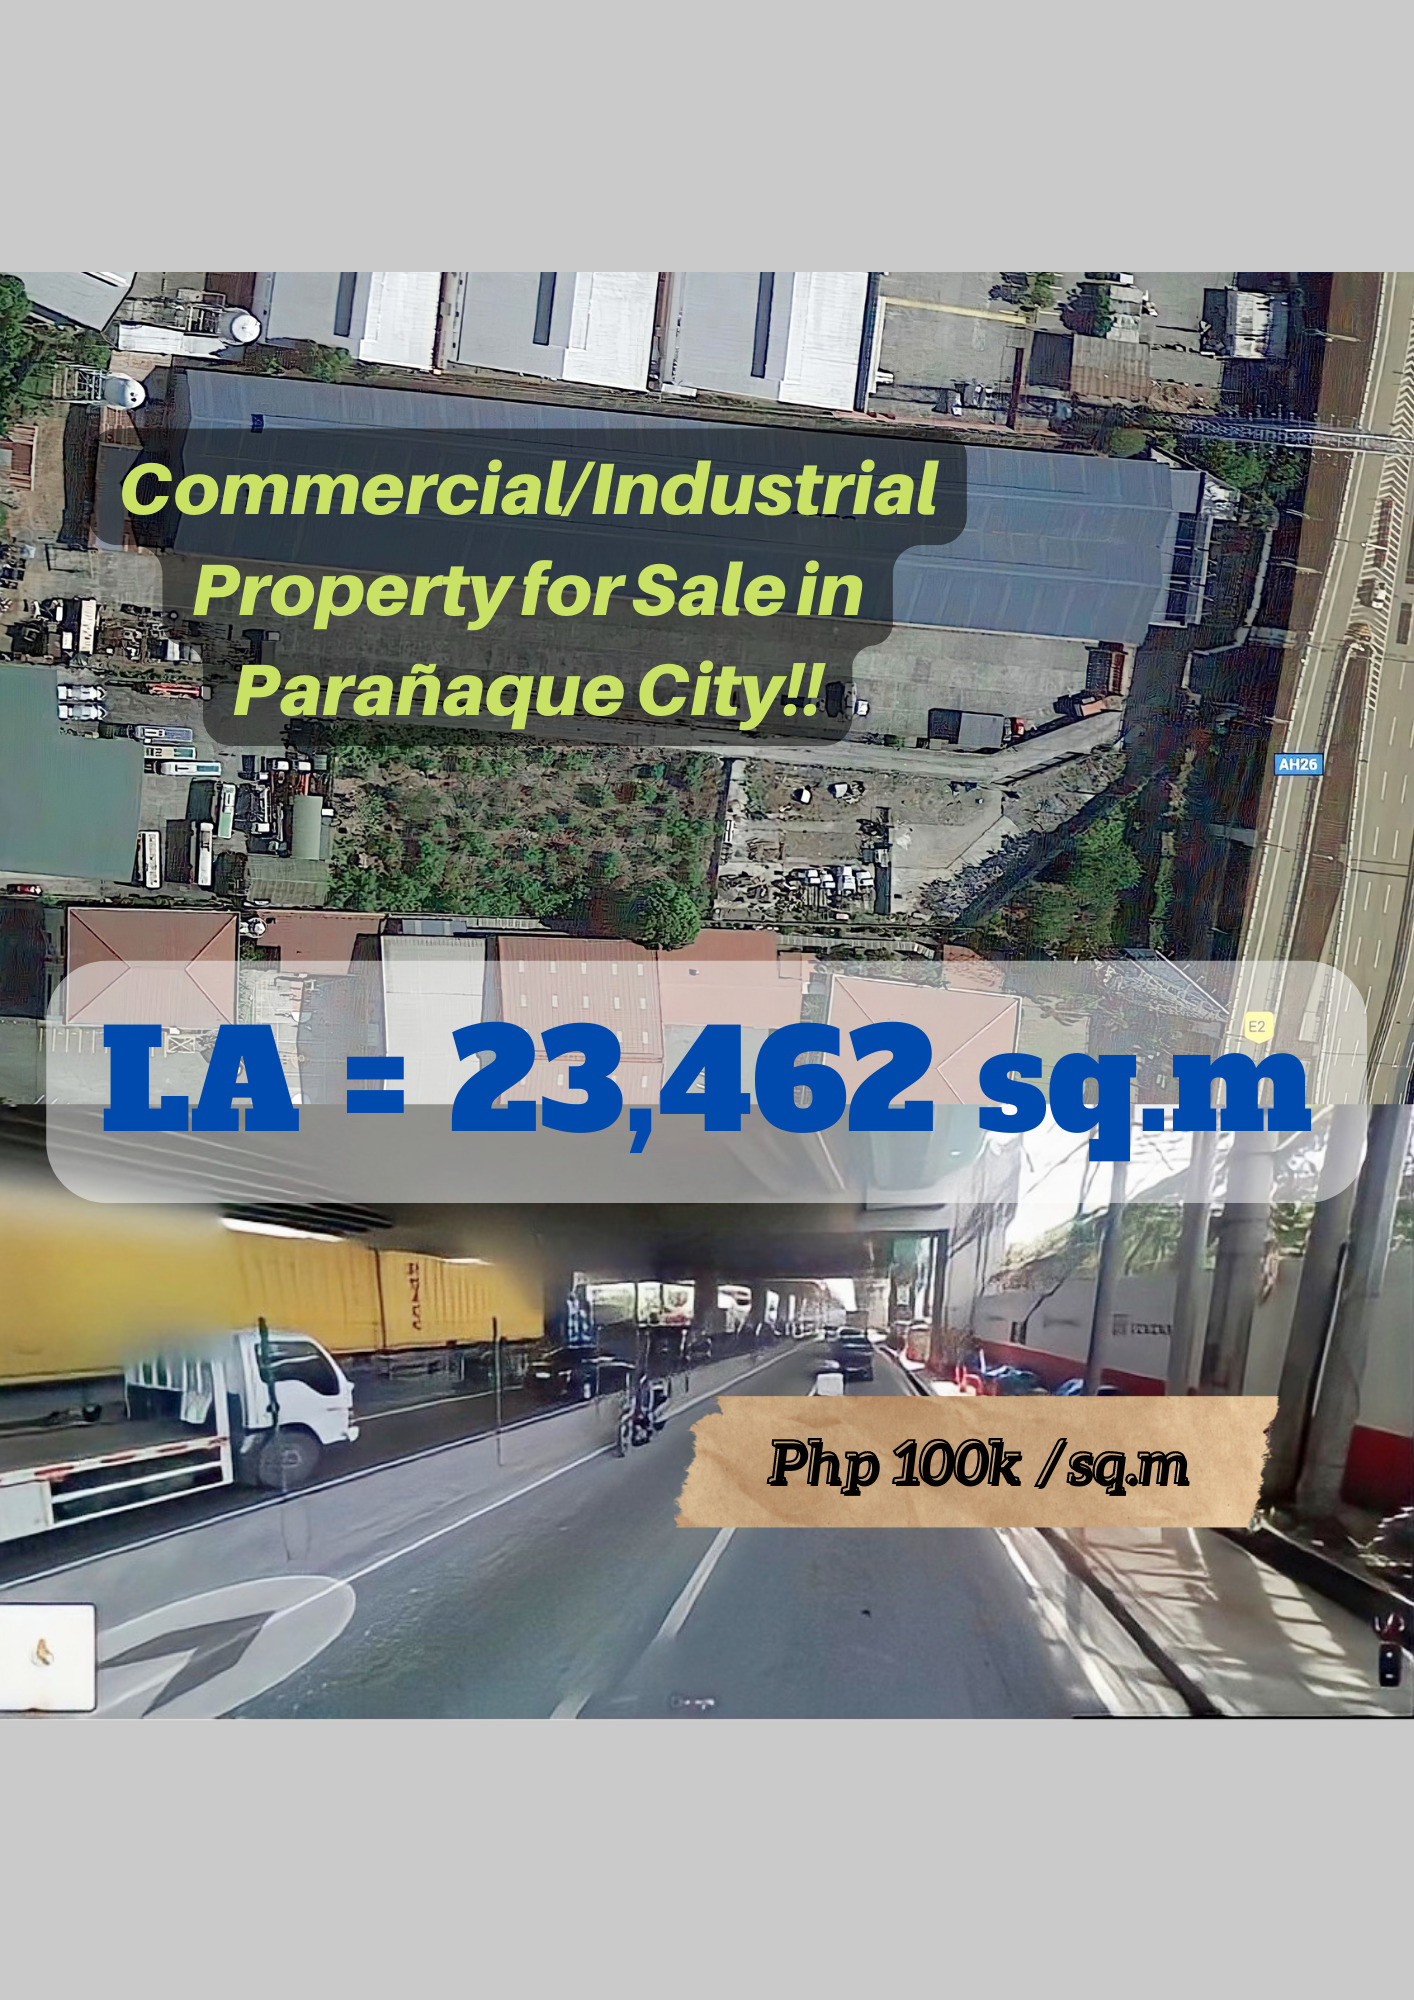 Commercial /Industrial Property for Sale in Parañaque City‼️